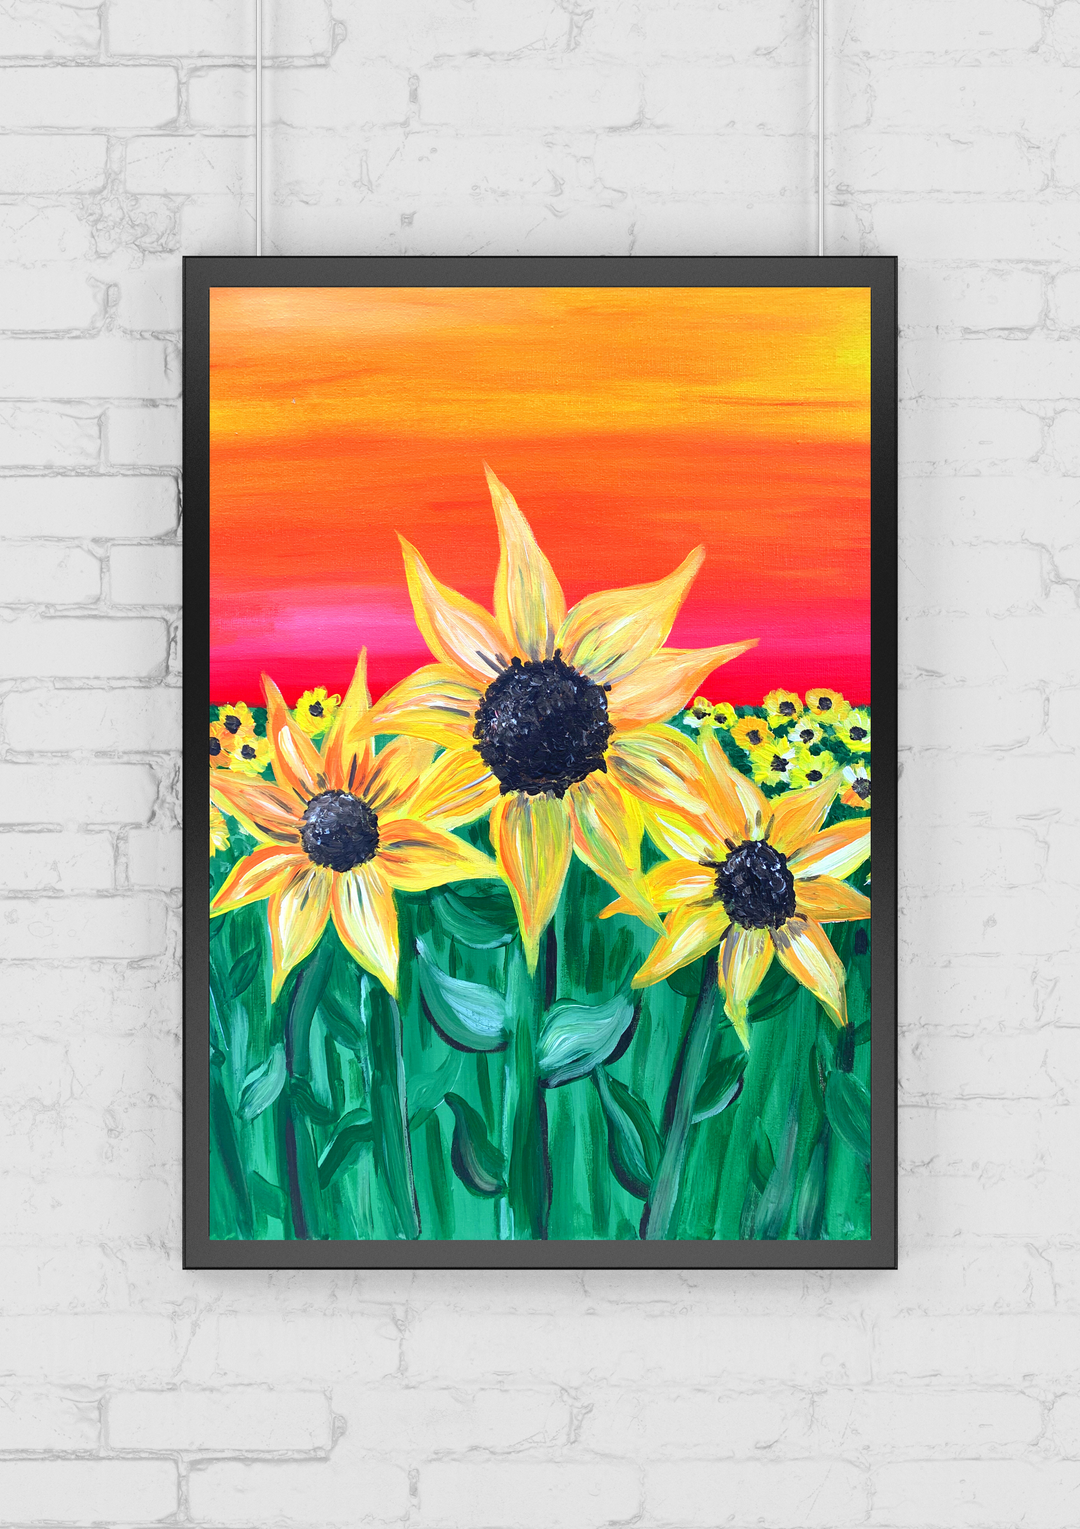 SUNFLOWERS - PAINT AND SIP 24TH FEBRUARY - BURLEIGH HEADS 5PM-Paint Juicy - Paint and Sip-Paint Juicy - Paint and Sip